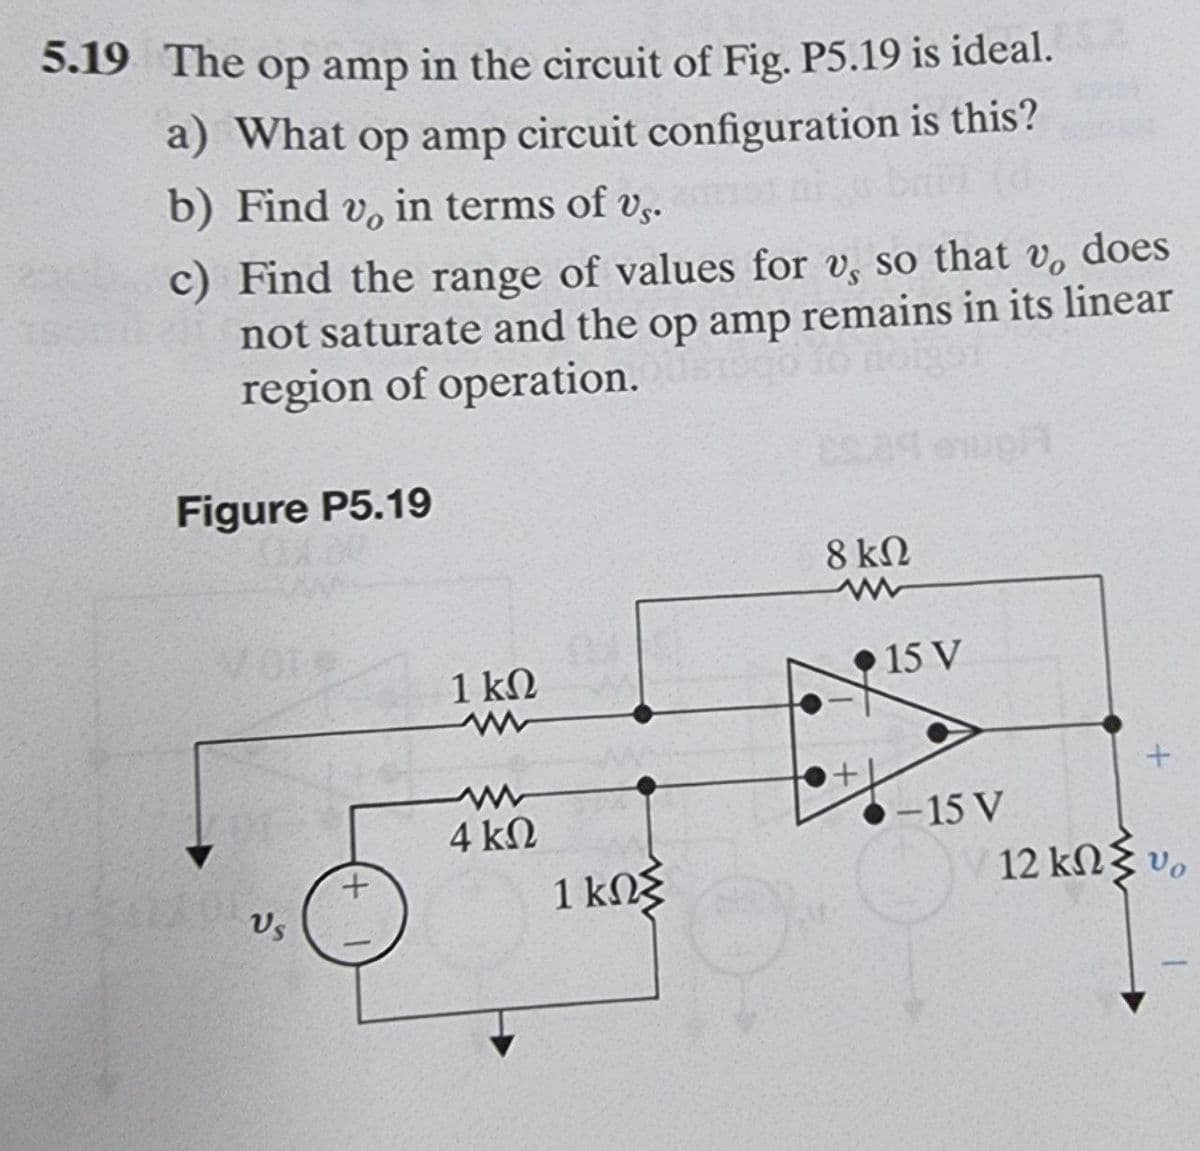 5.19 The op amp in the circuit of Fig. P5.19 is ideal.
a) What op amp circuit configuration is this?
b) Find v,
in terms of vs.
c) Find the range of values for v, so that v, does
not saturate and the op amp remains in its linear
region of operation.
Figure P5.19
8 kN
1 kN
•15 V
-15 V
12 kN vo
4 kN
+.
Vs
1 kNg
